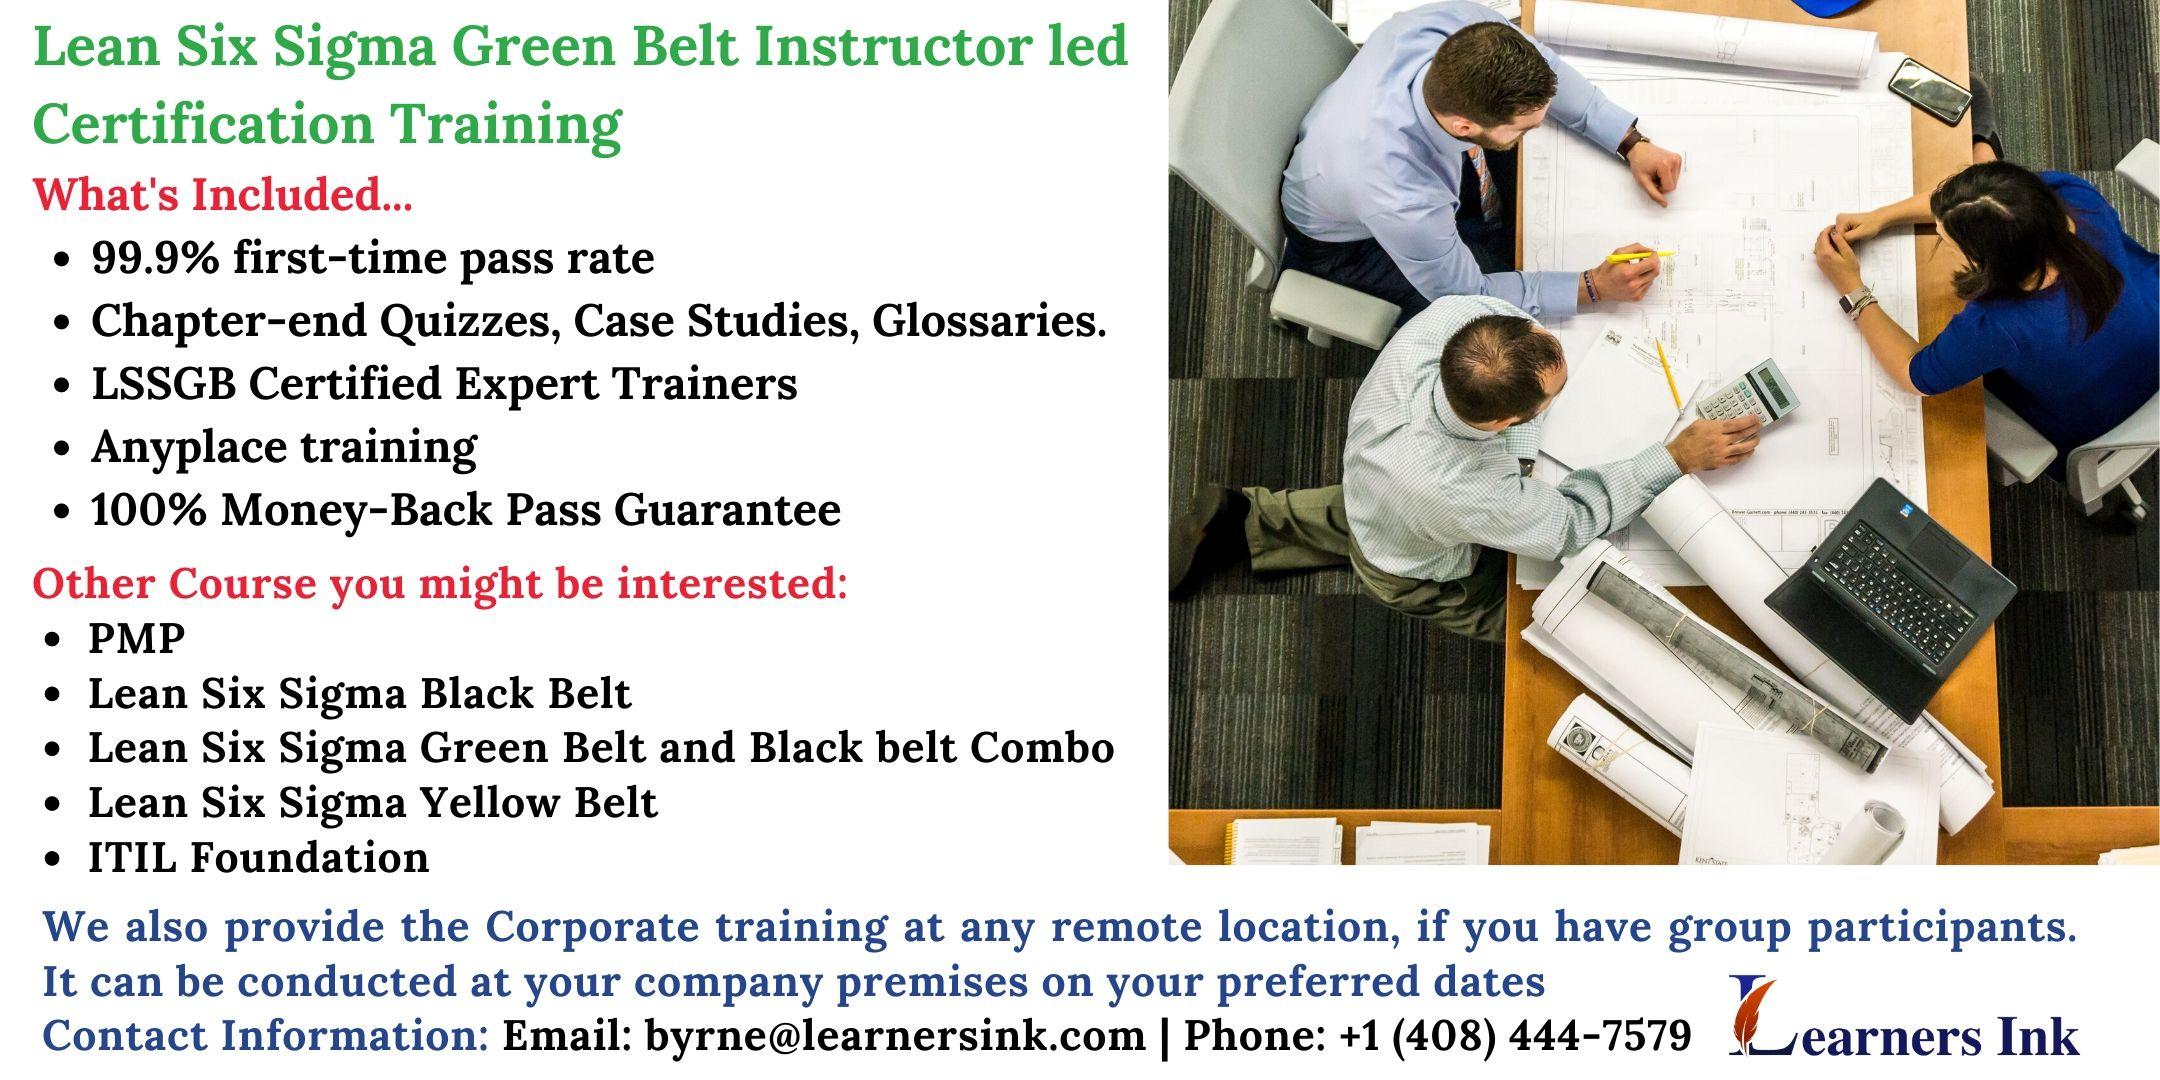 Lean Six Sigma Green Belt Certification Training Course (LSSGB) in Miami Gardens